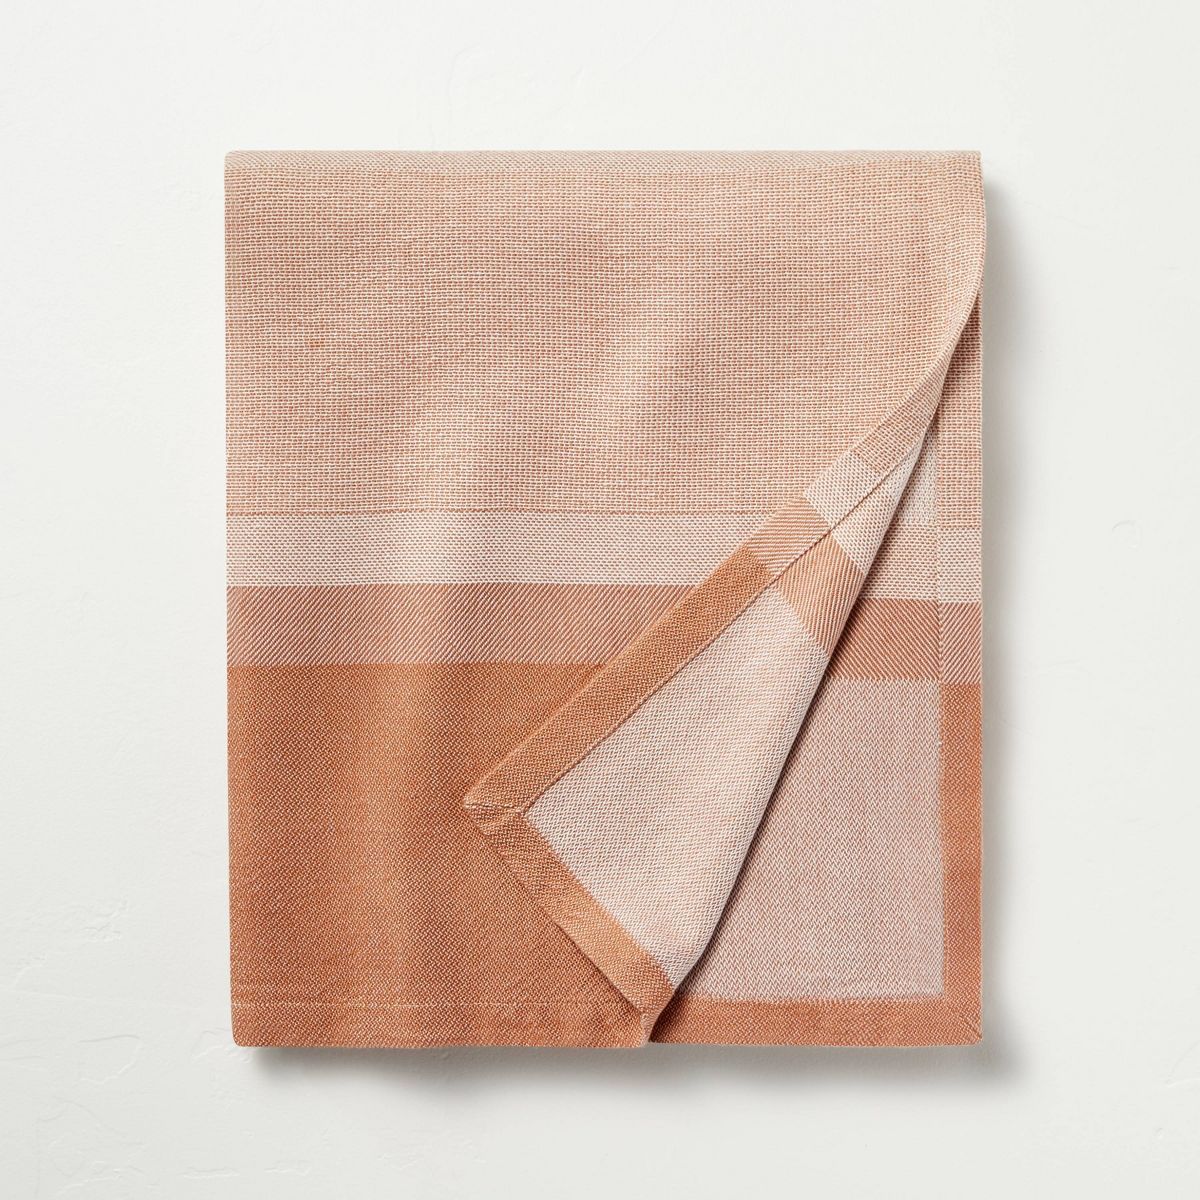 Ombre Stripe Dobby Throw Blanket Clay/Tan/Cream - Hearth & Hand™ with Magnolia | Target